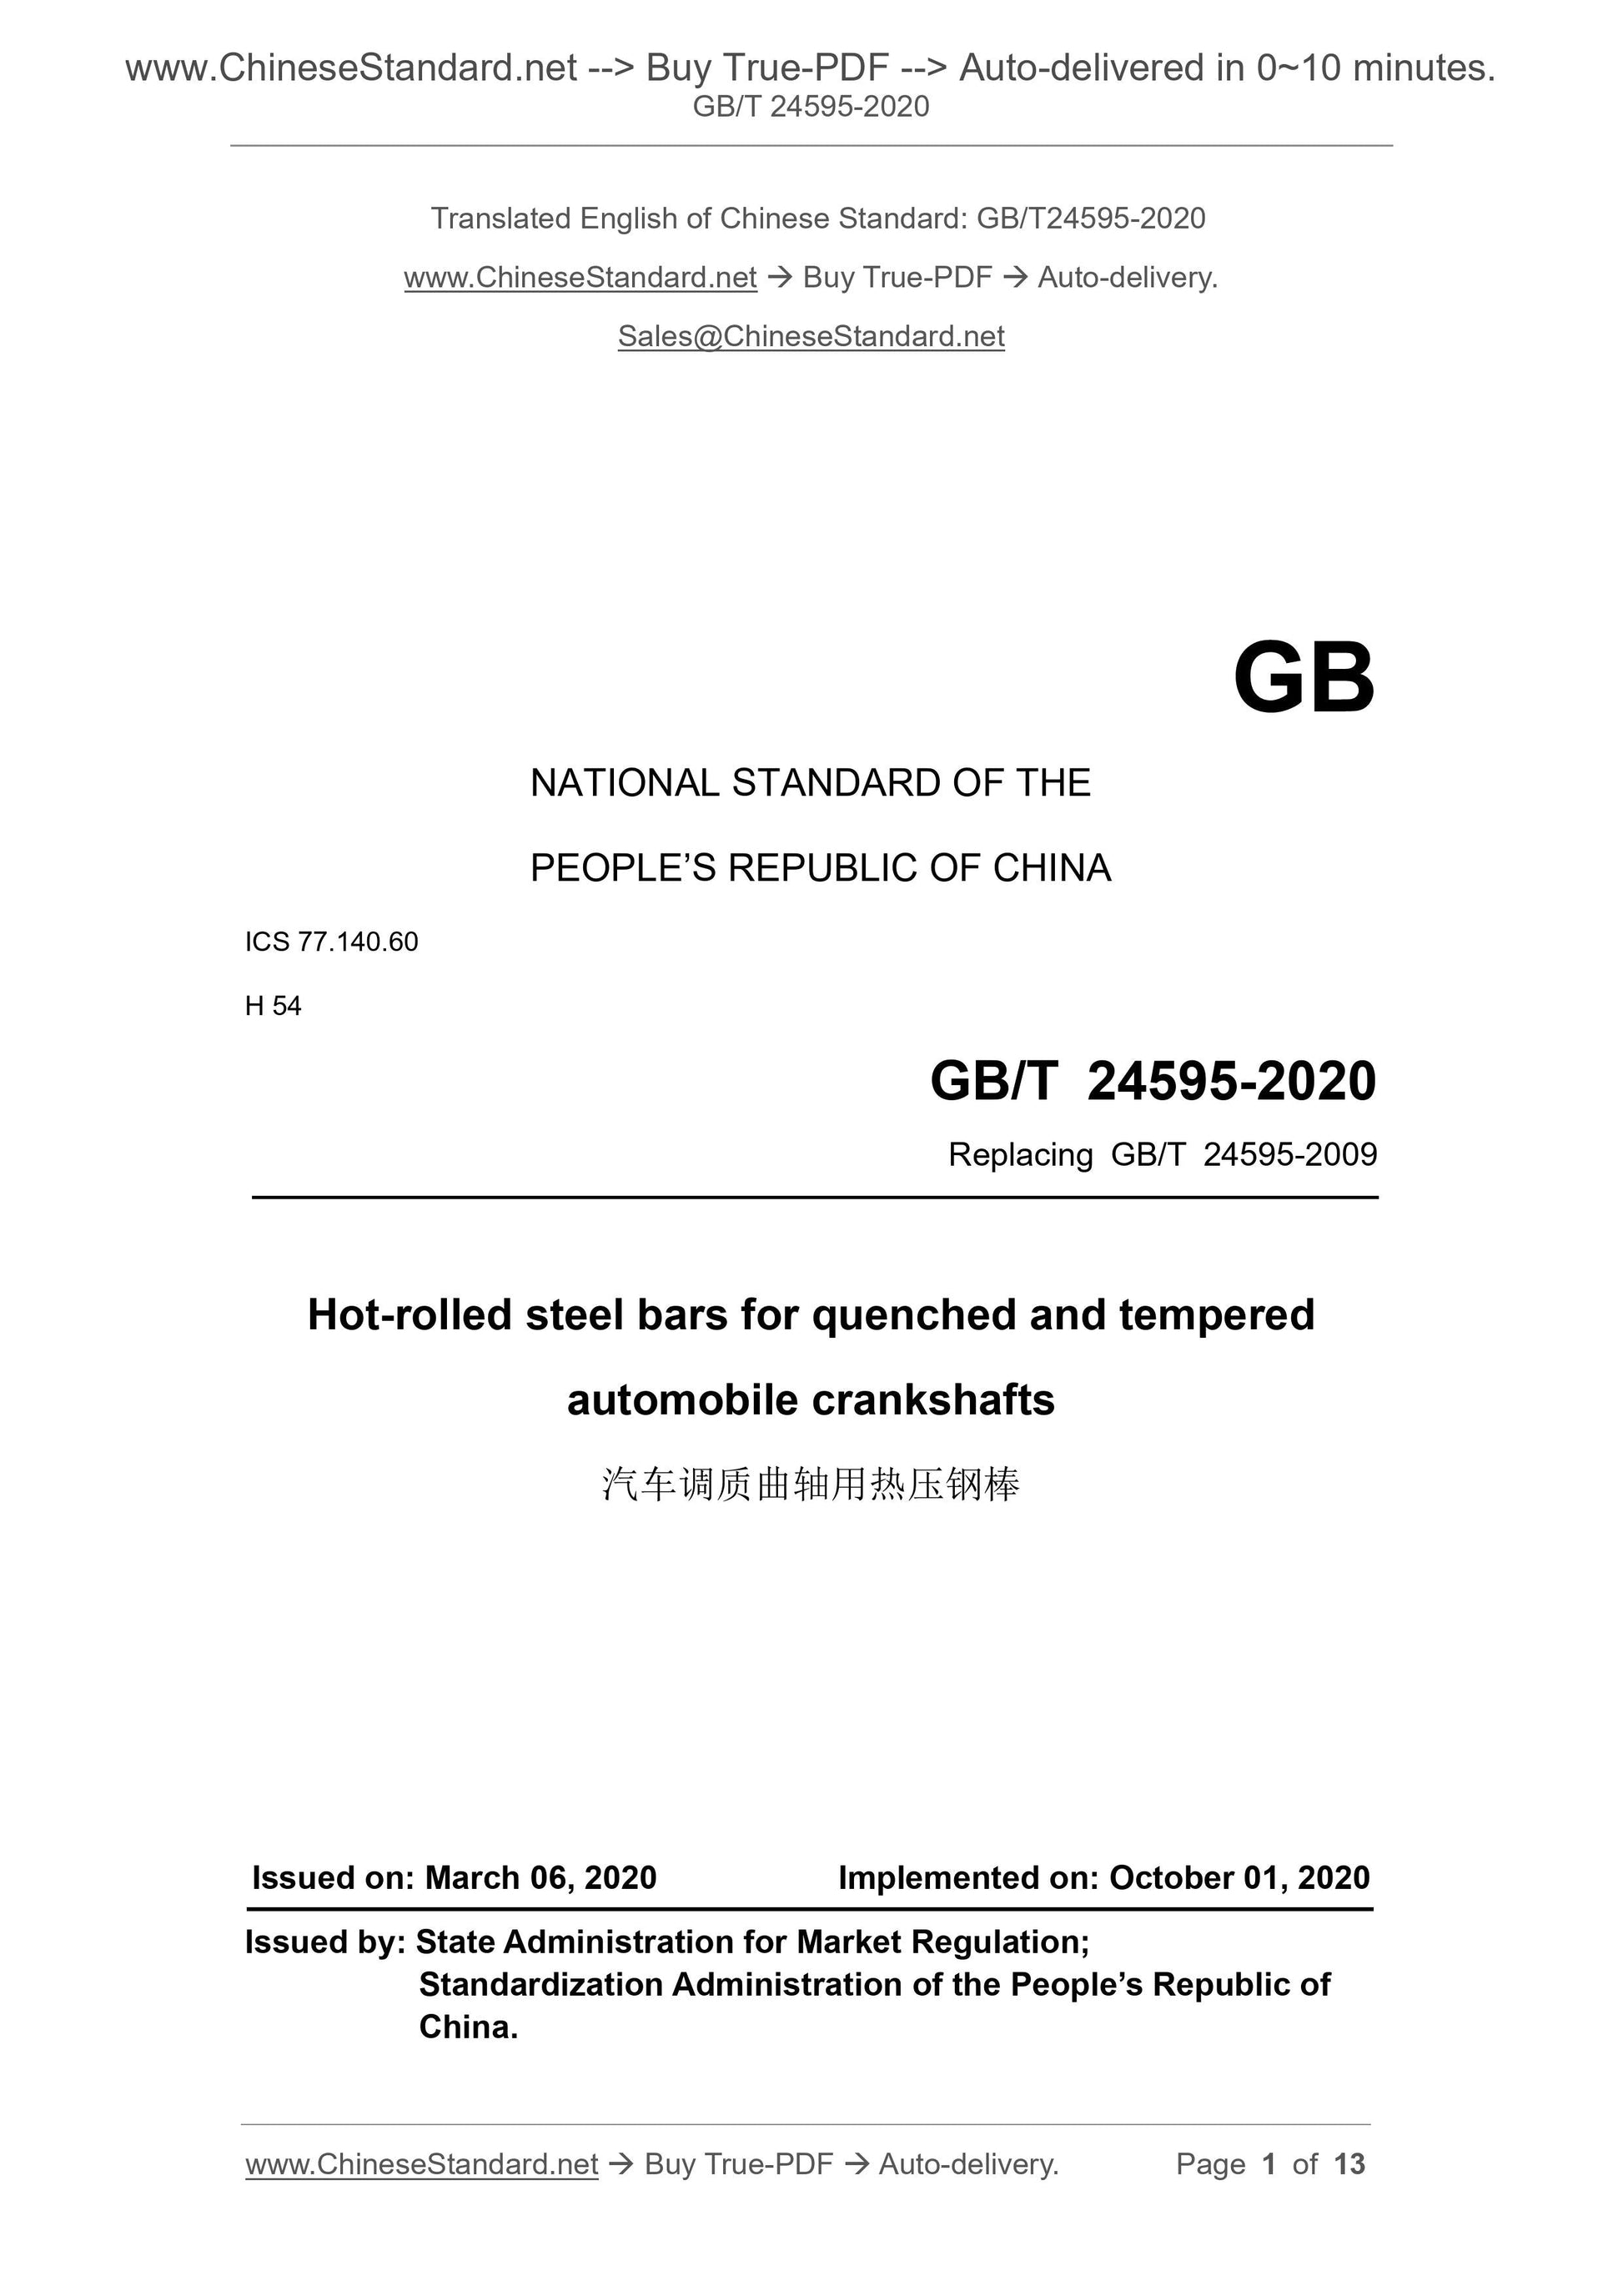 GB/T 24595-2020 Page 1